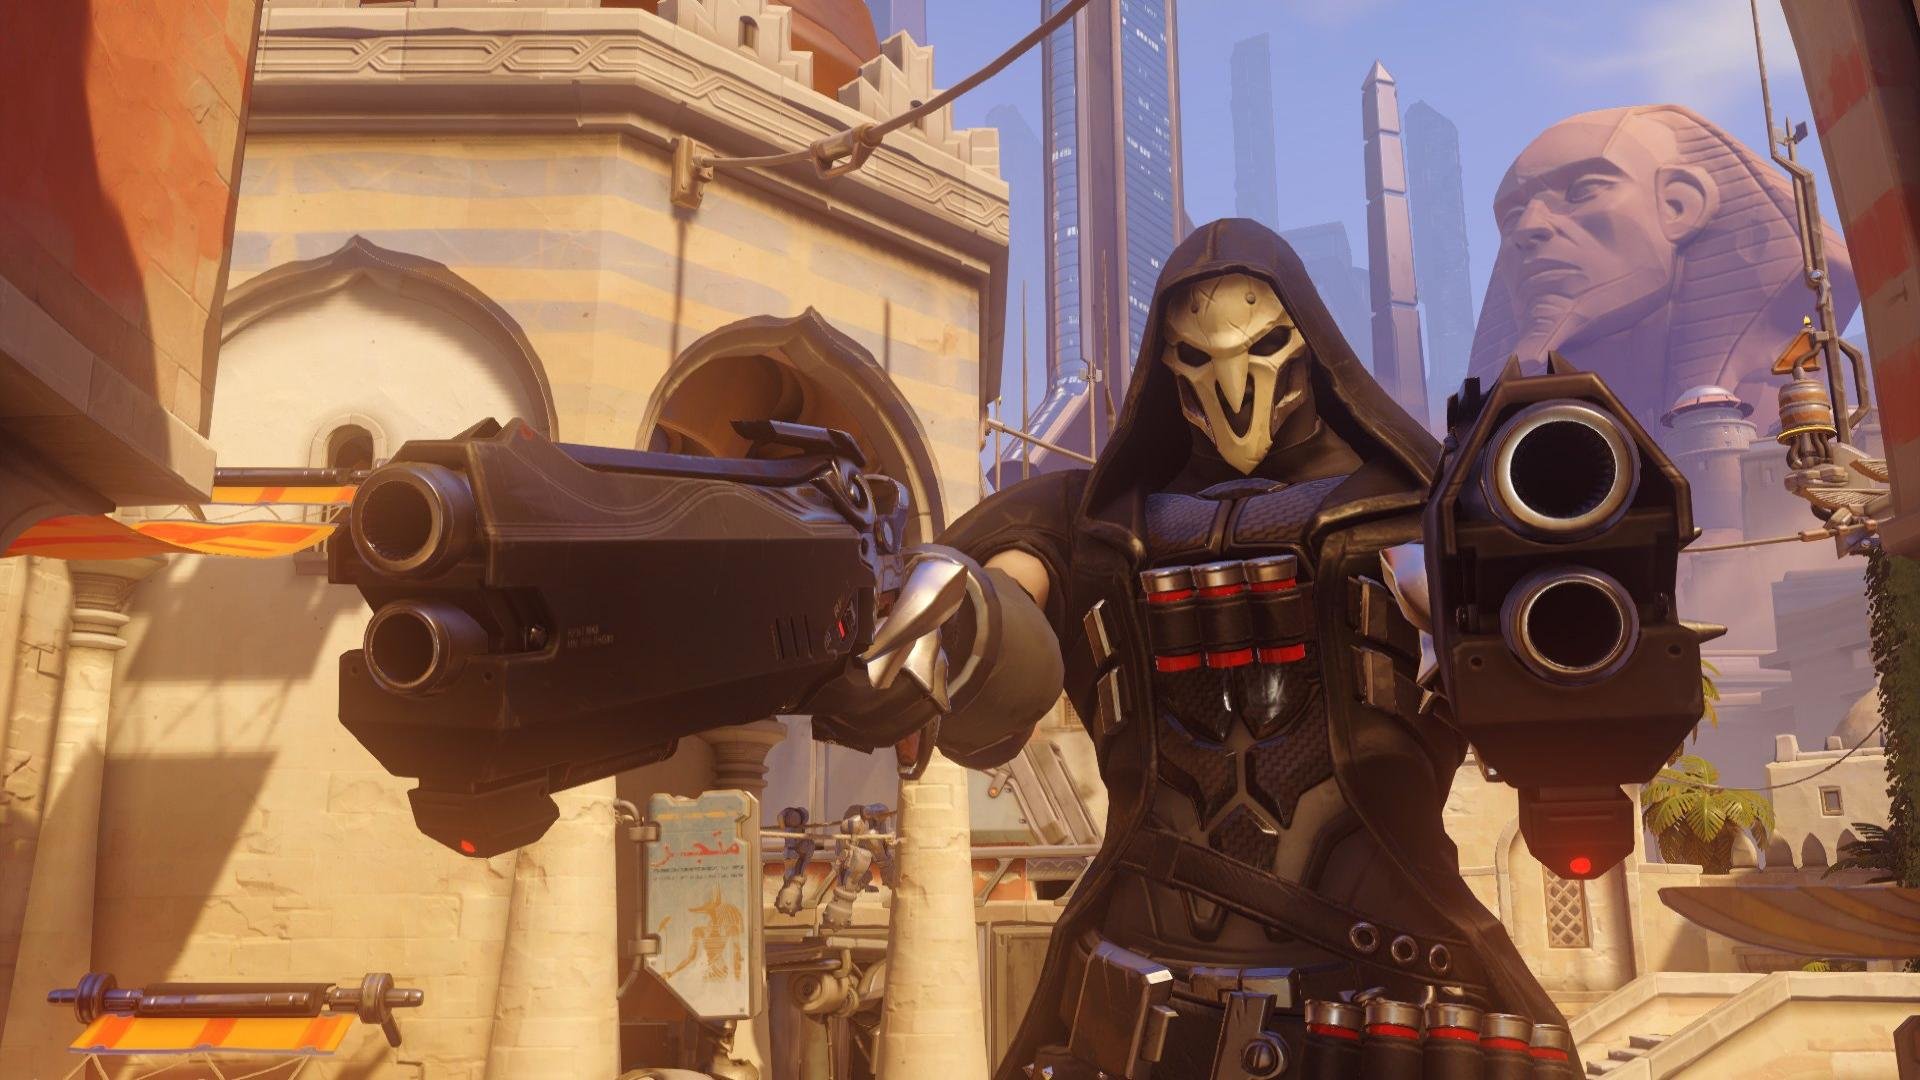 Download full hd 1920x1080 Reaper (Overwatch) desktop background ID:170430 for free